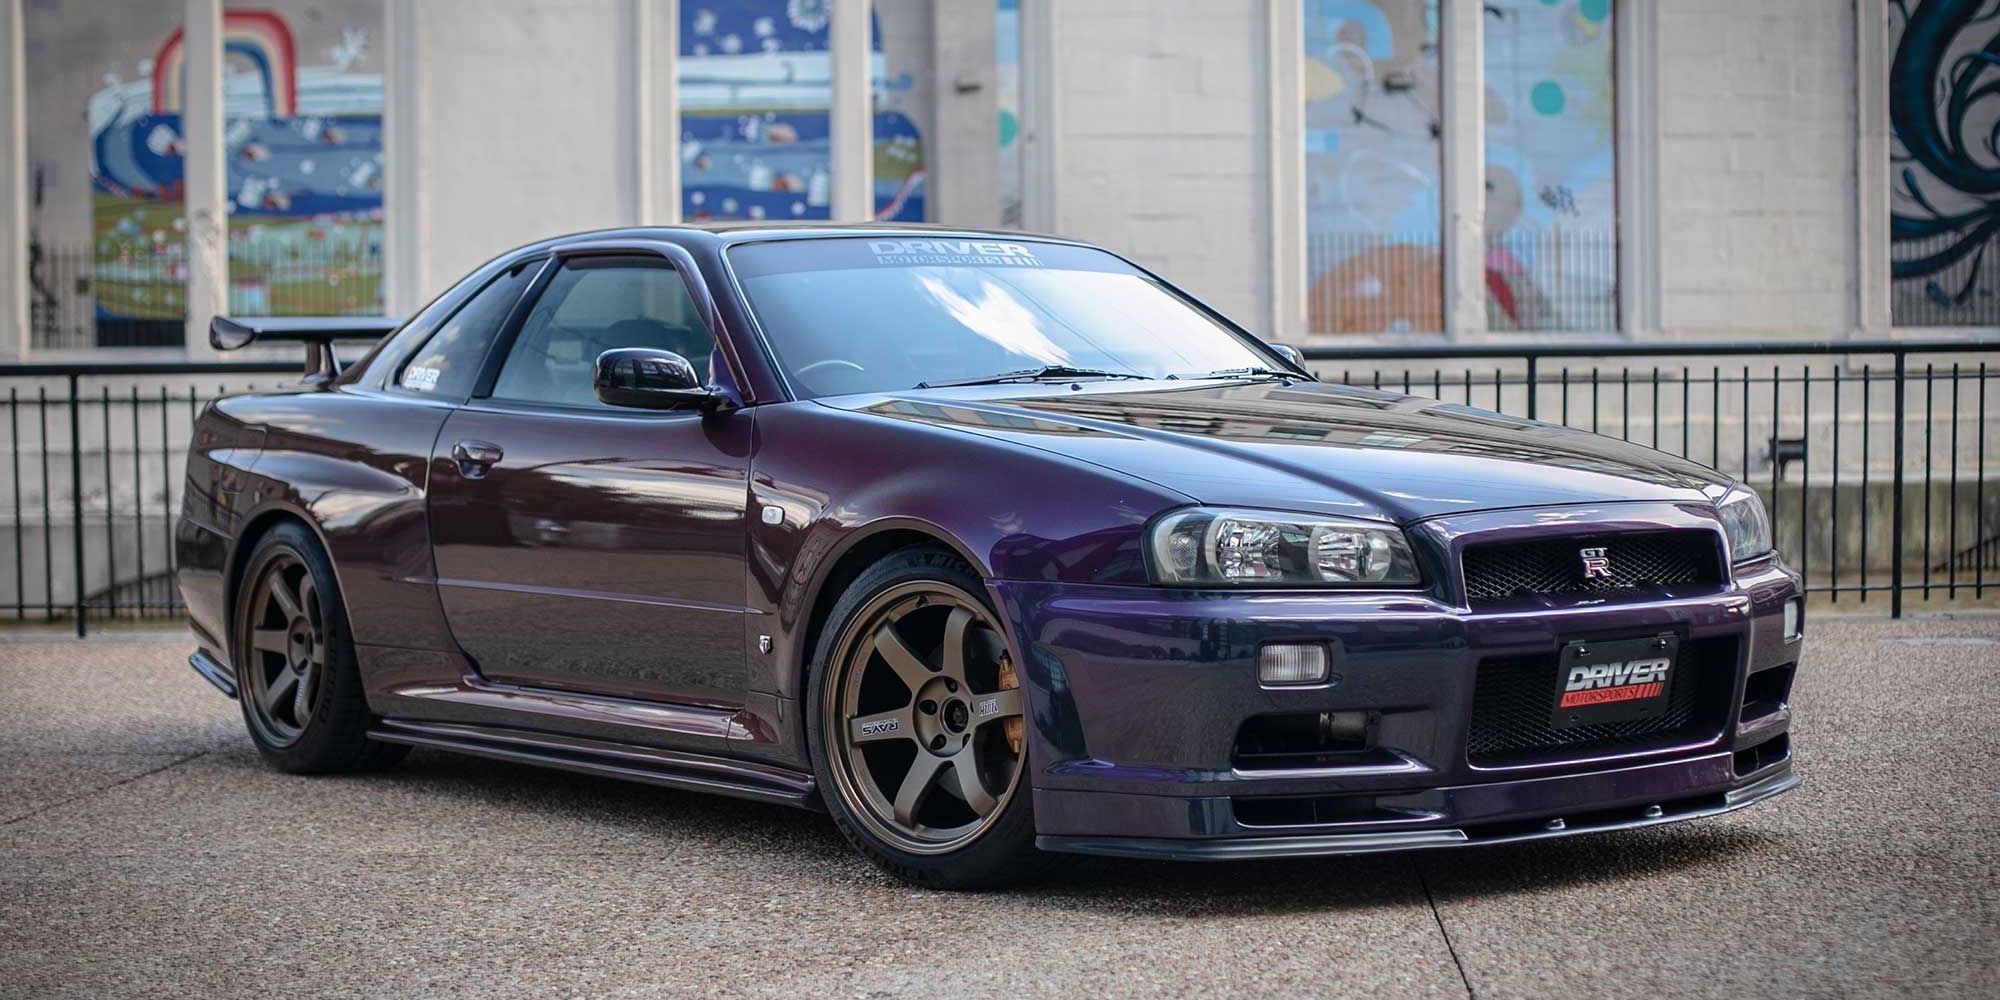 The front of the Midnight Purple R34 GTR